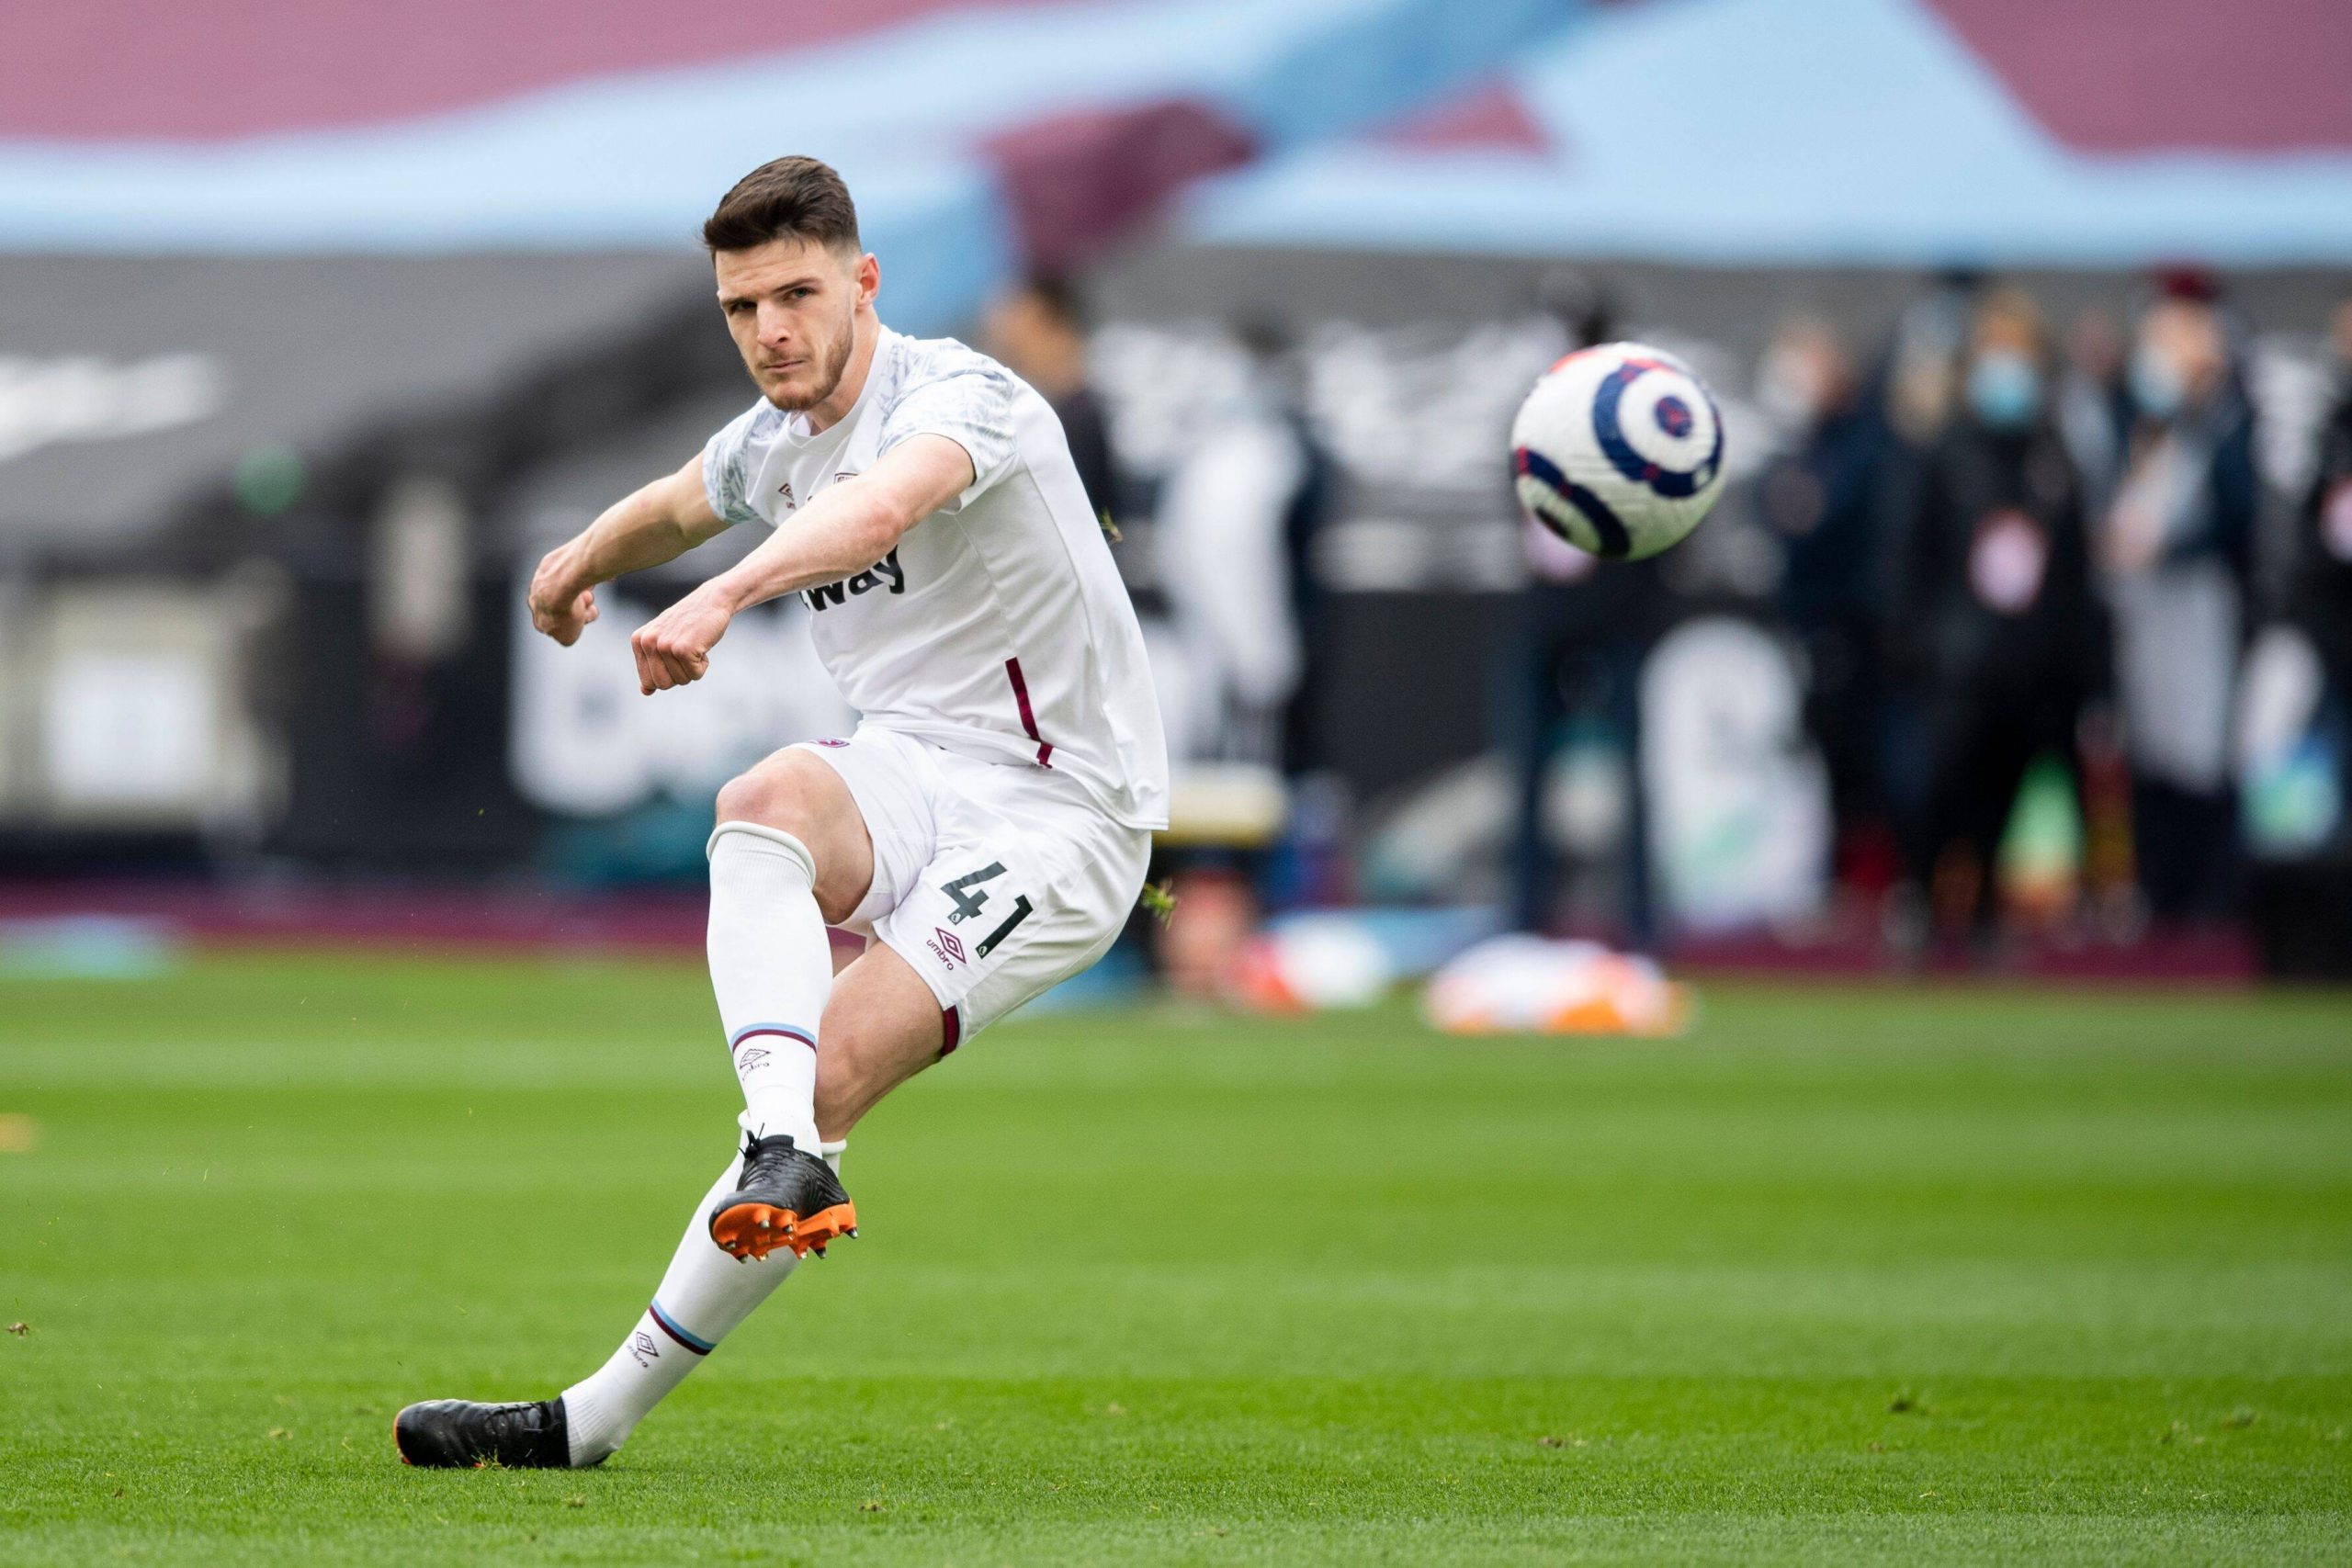 Declan Rice is one of the better midfielders in the English Premier League.